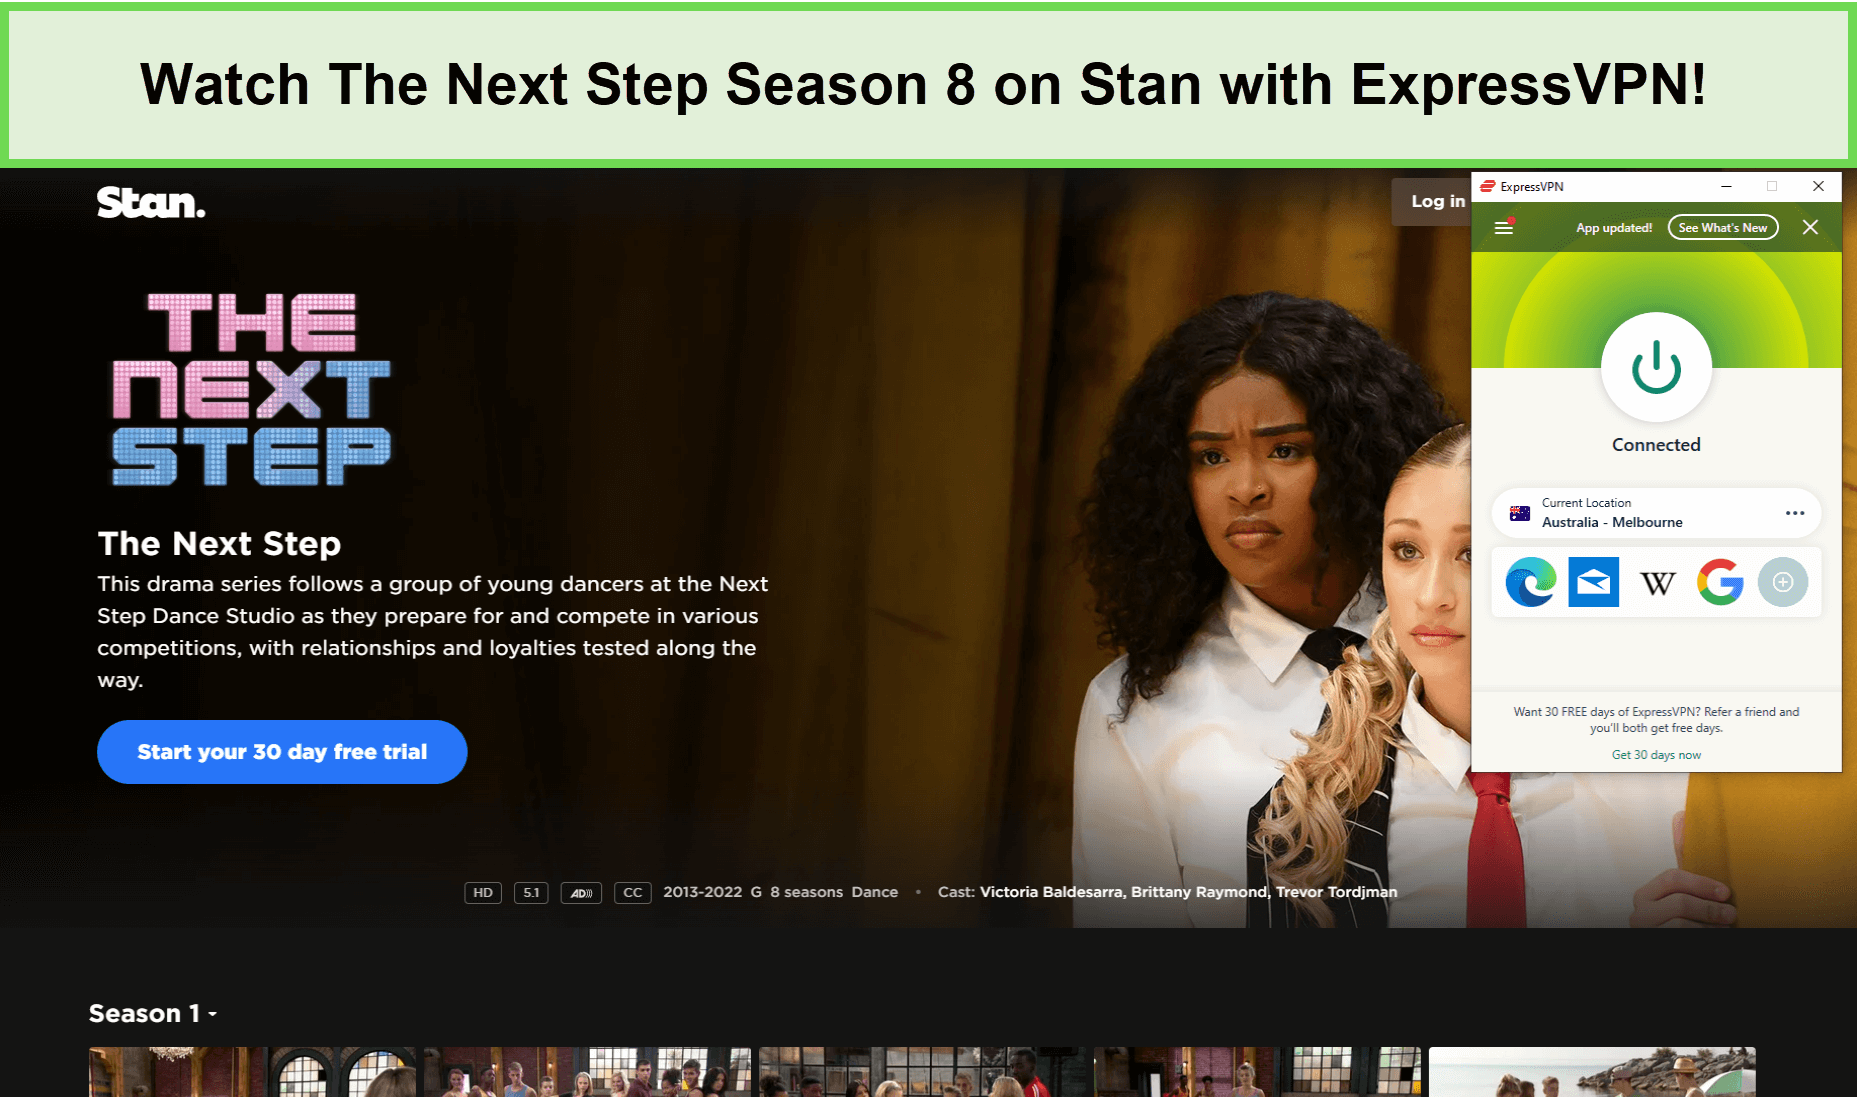 Watch-The-Next-Step-Season-8-in-South Korea-on-Stan-with-ExpressVPN